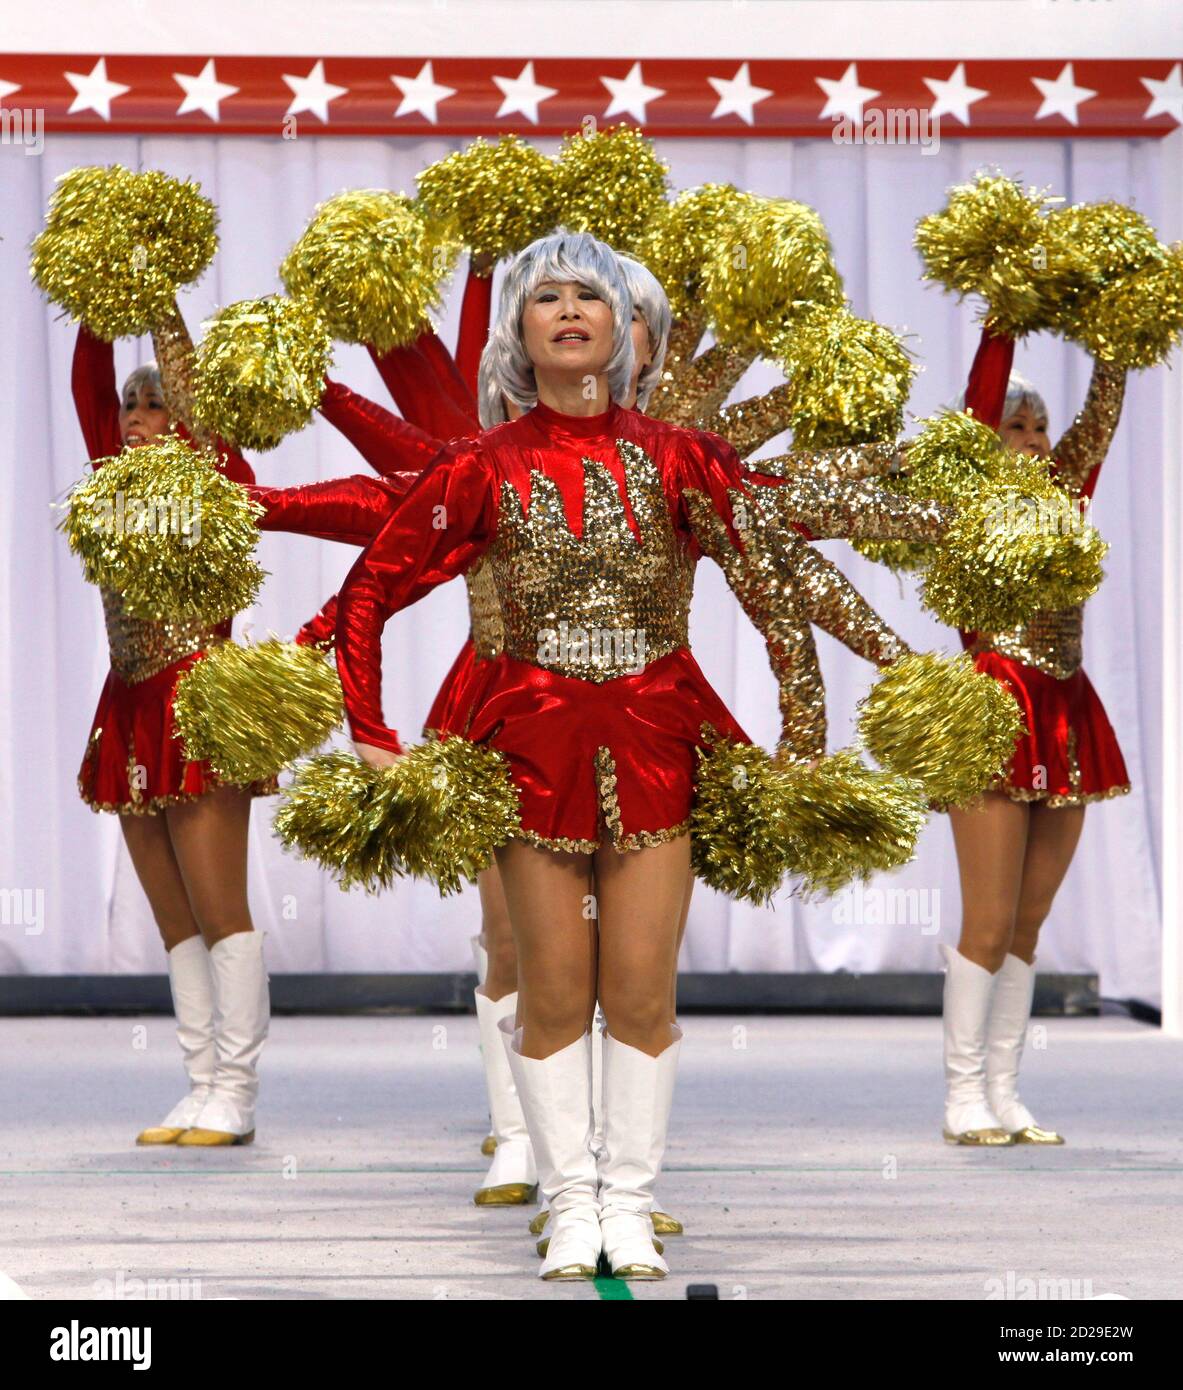 Members of a seniors' group called "Japan Pom Pom" perform on stage the All Japan Cheerleading and Dance Championship Chiba, east of Tokyo, March 27, Japan may have